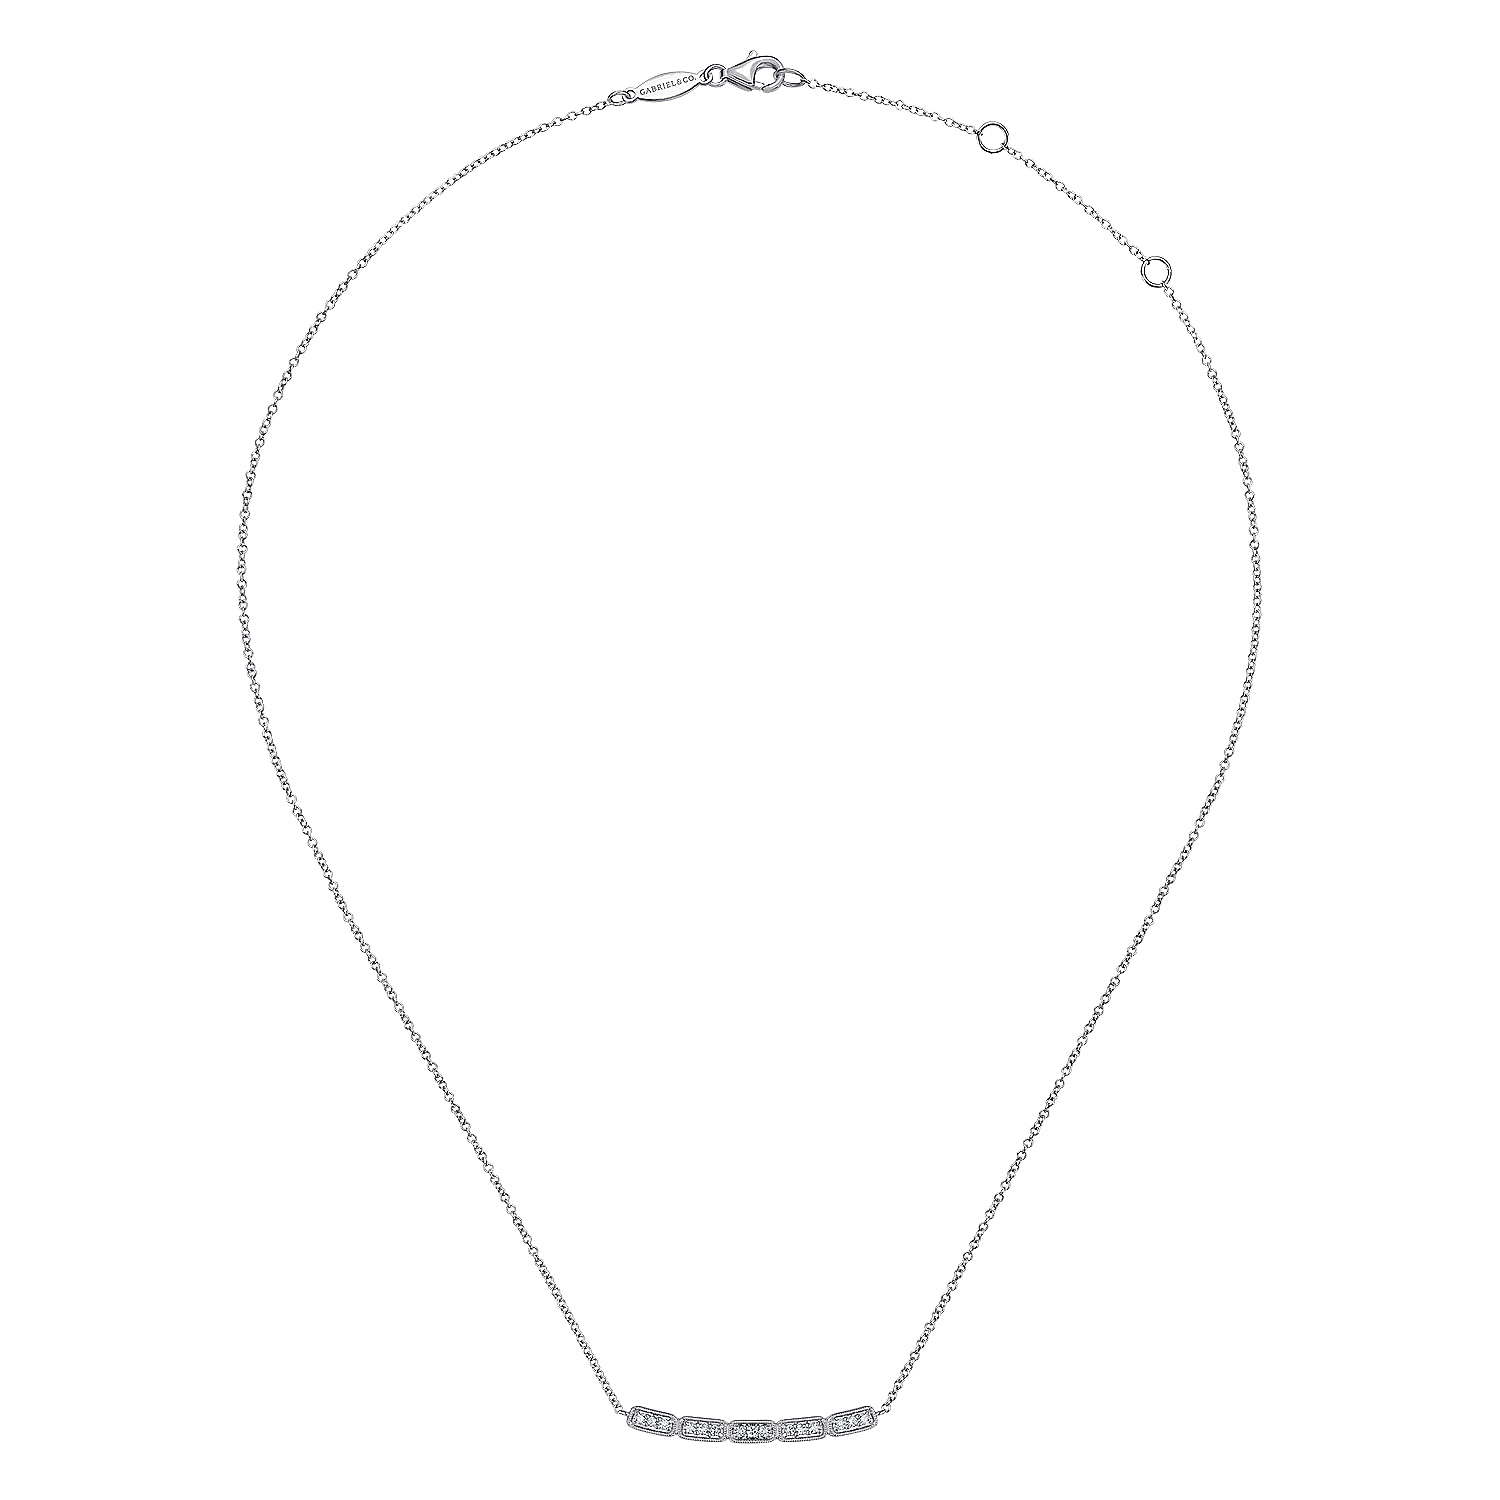 14K White Gold Curved Rectangular Station Bar Necklace with Diamonds